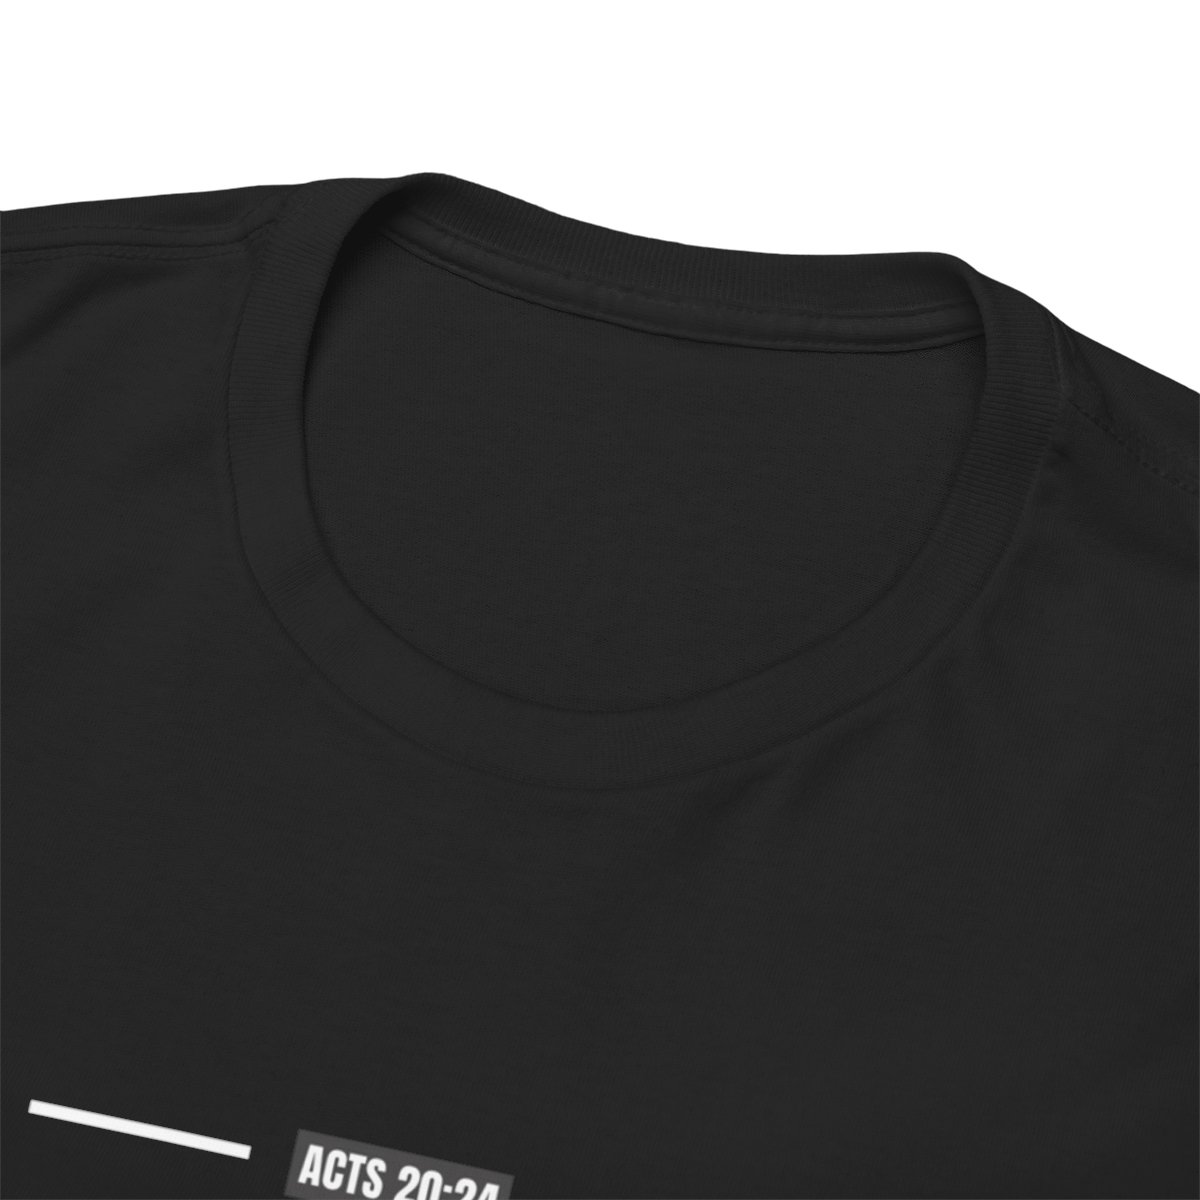 FOUND GUILTY T-SHIRT product thumbnail image